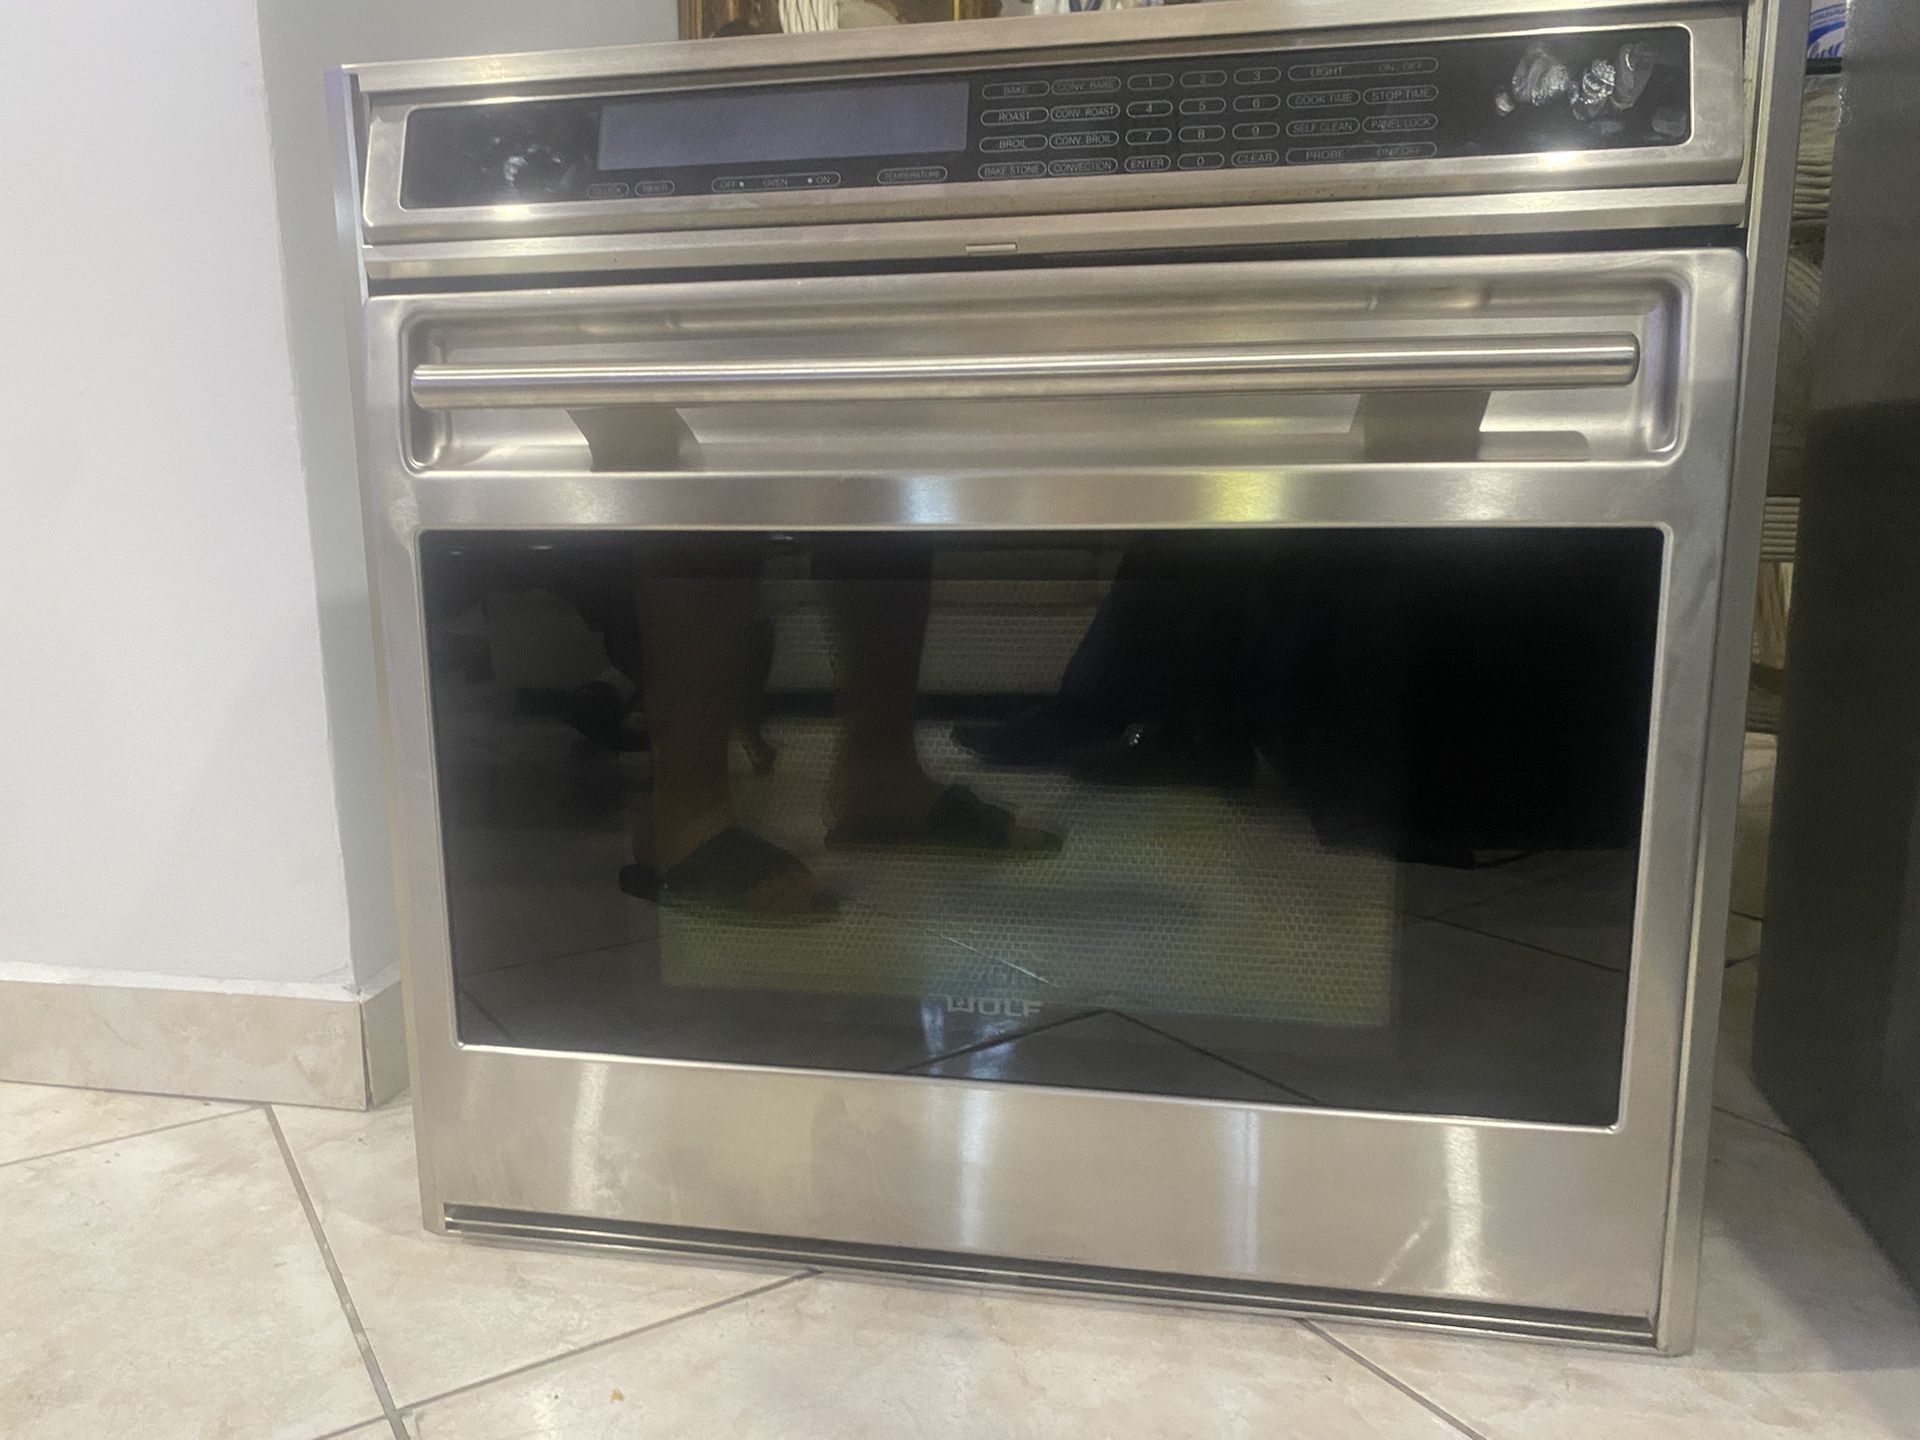 Wolf Oven and microwave set 